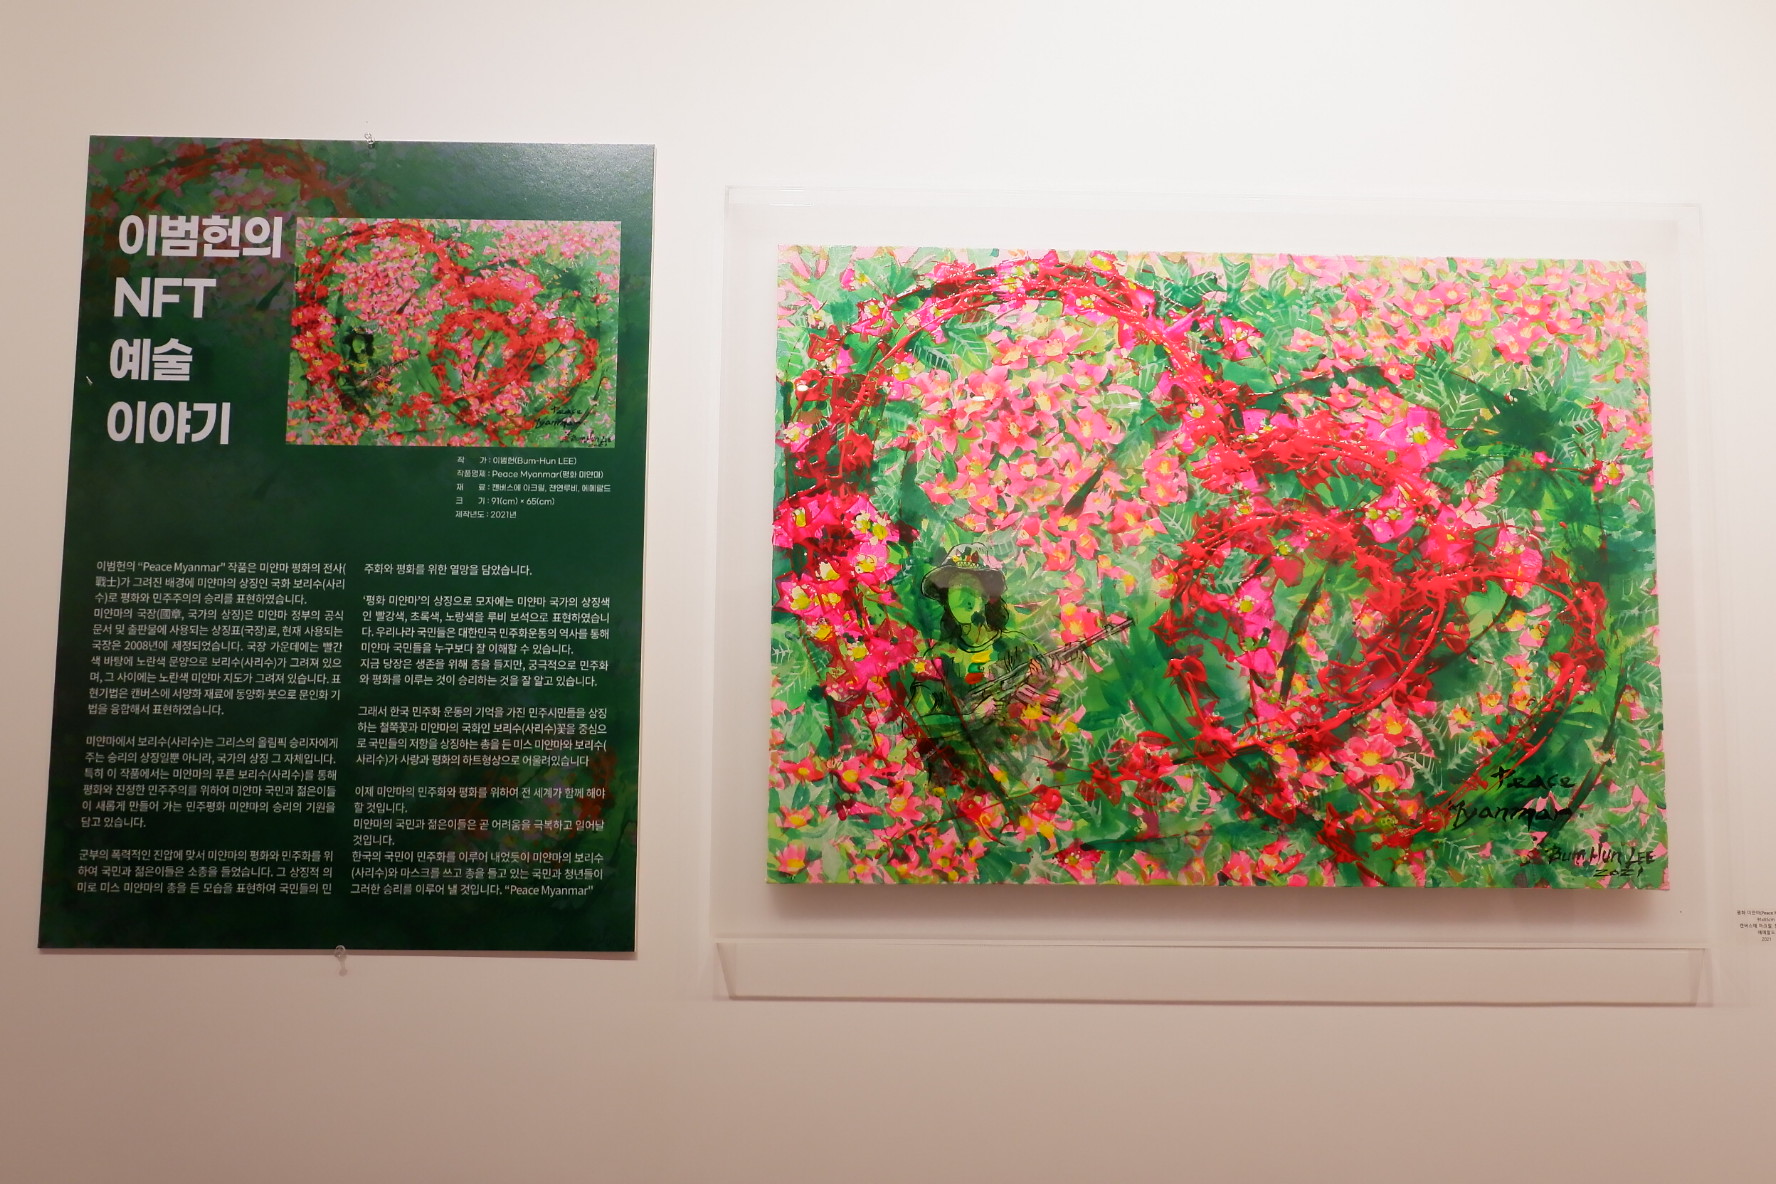 “Art forms in Nature: Flower Dance”: Bum Hun Lee Exhibition in Seoul